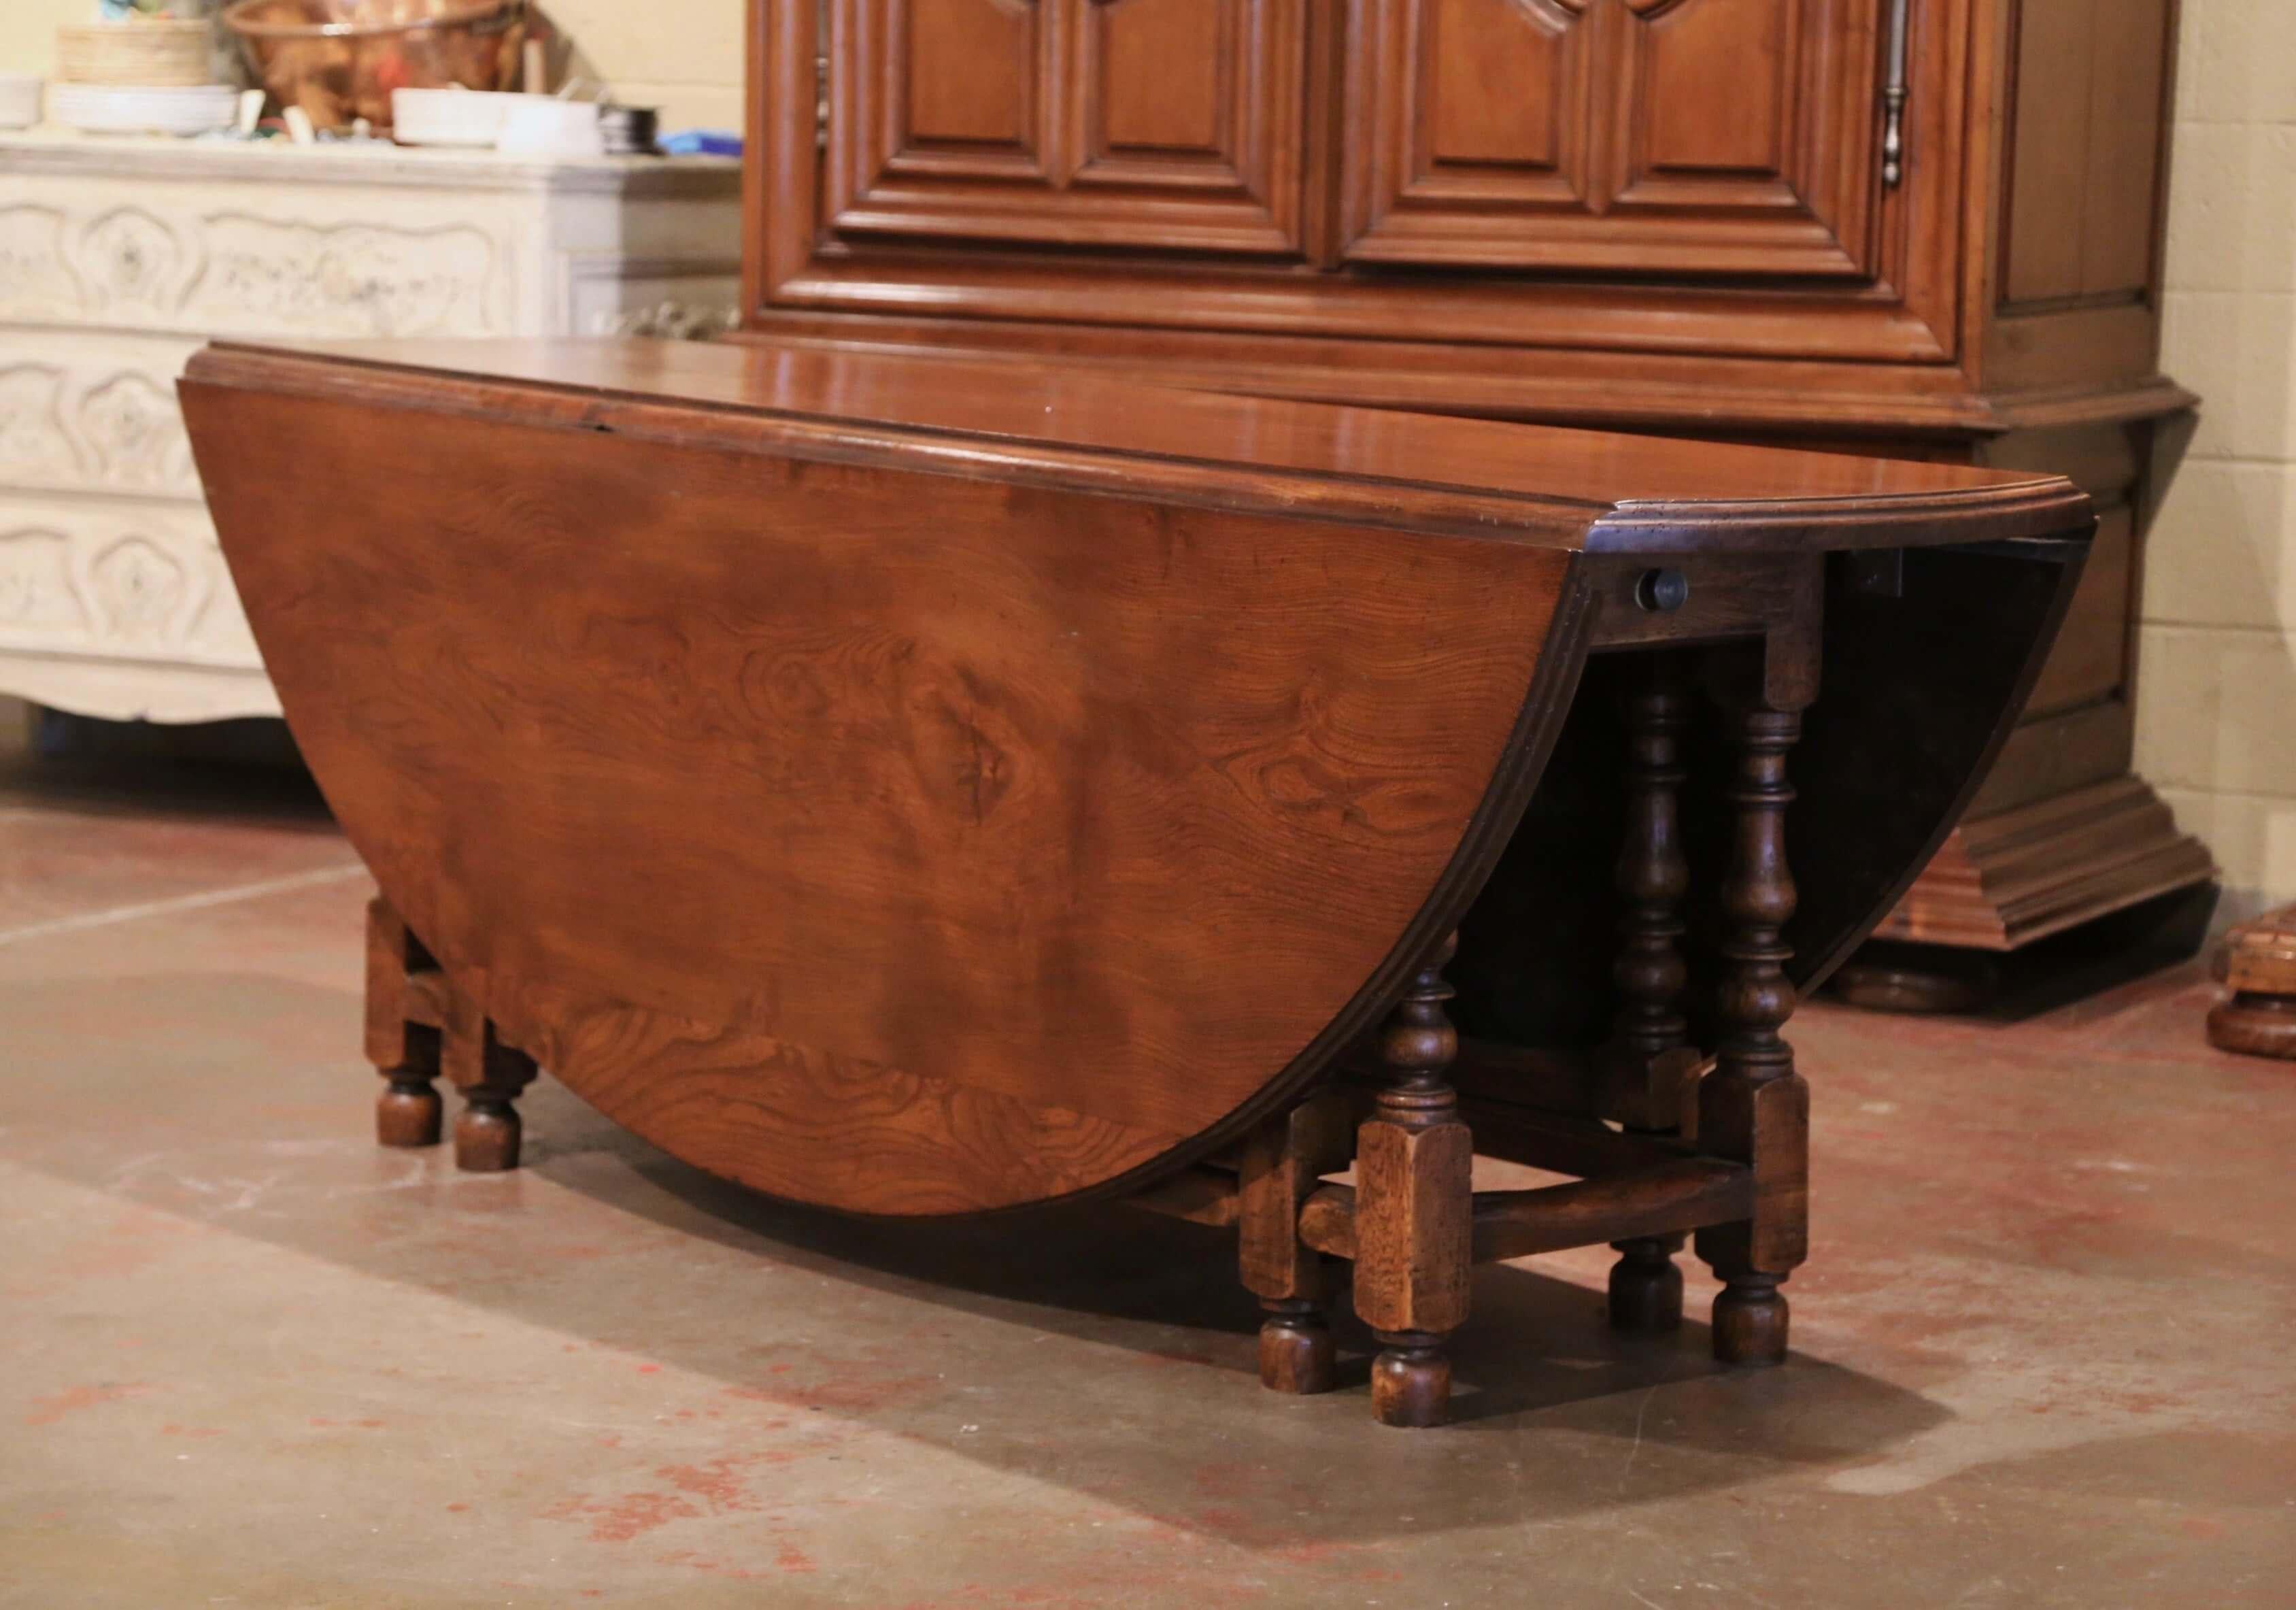 Crafted in England from solid chestnut, circa 1950, the large fruitwood dining room table stands on sturdy turned legs embellished with a decorative stretcher at the bottom. The table has four extra legs that unfold, and two large drop leaves come